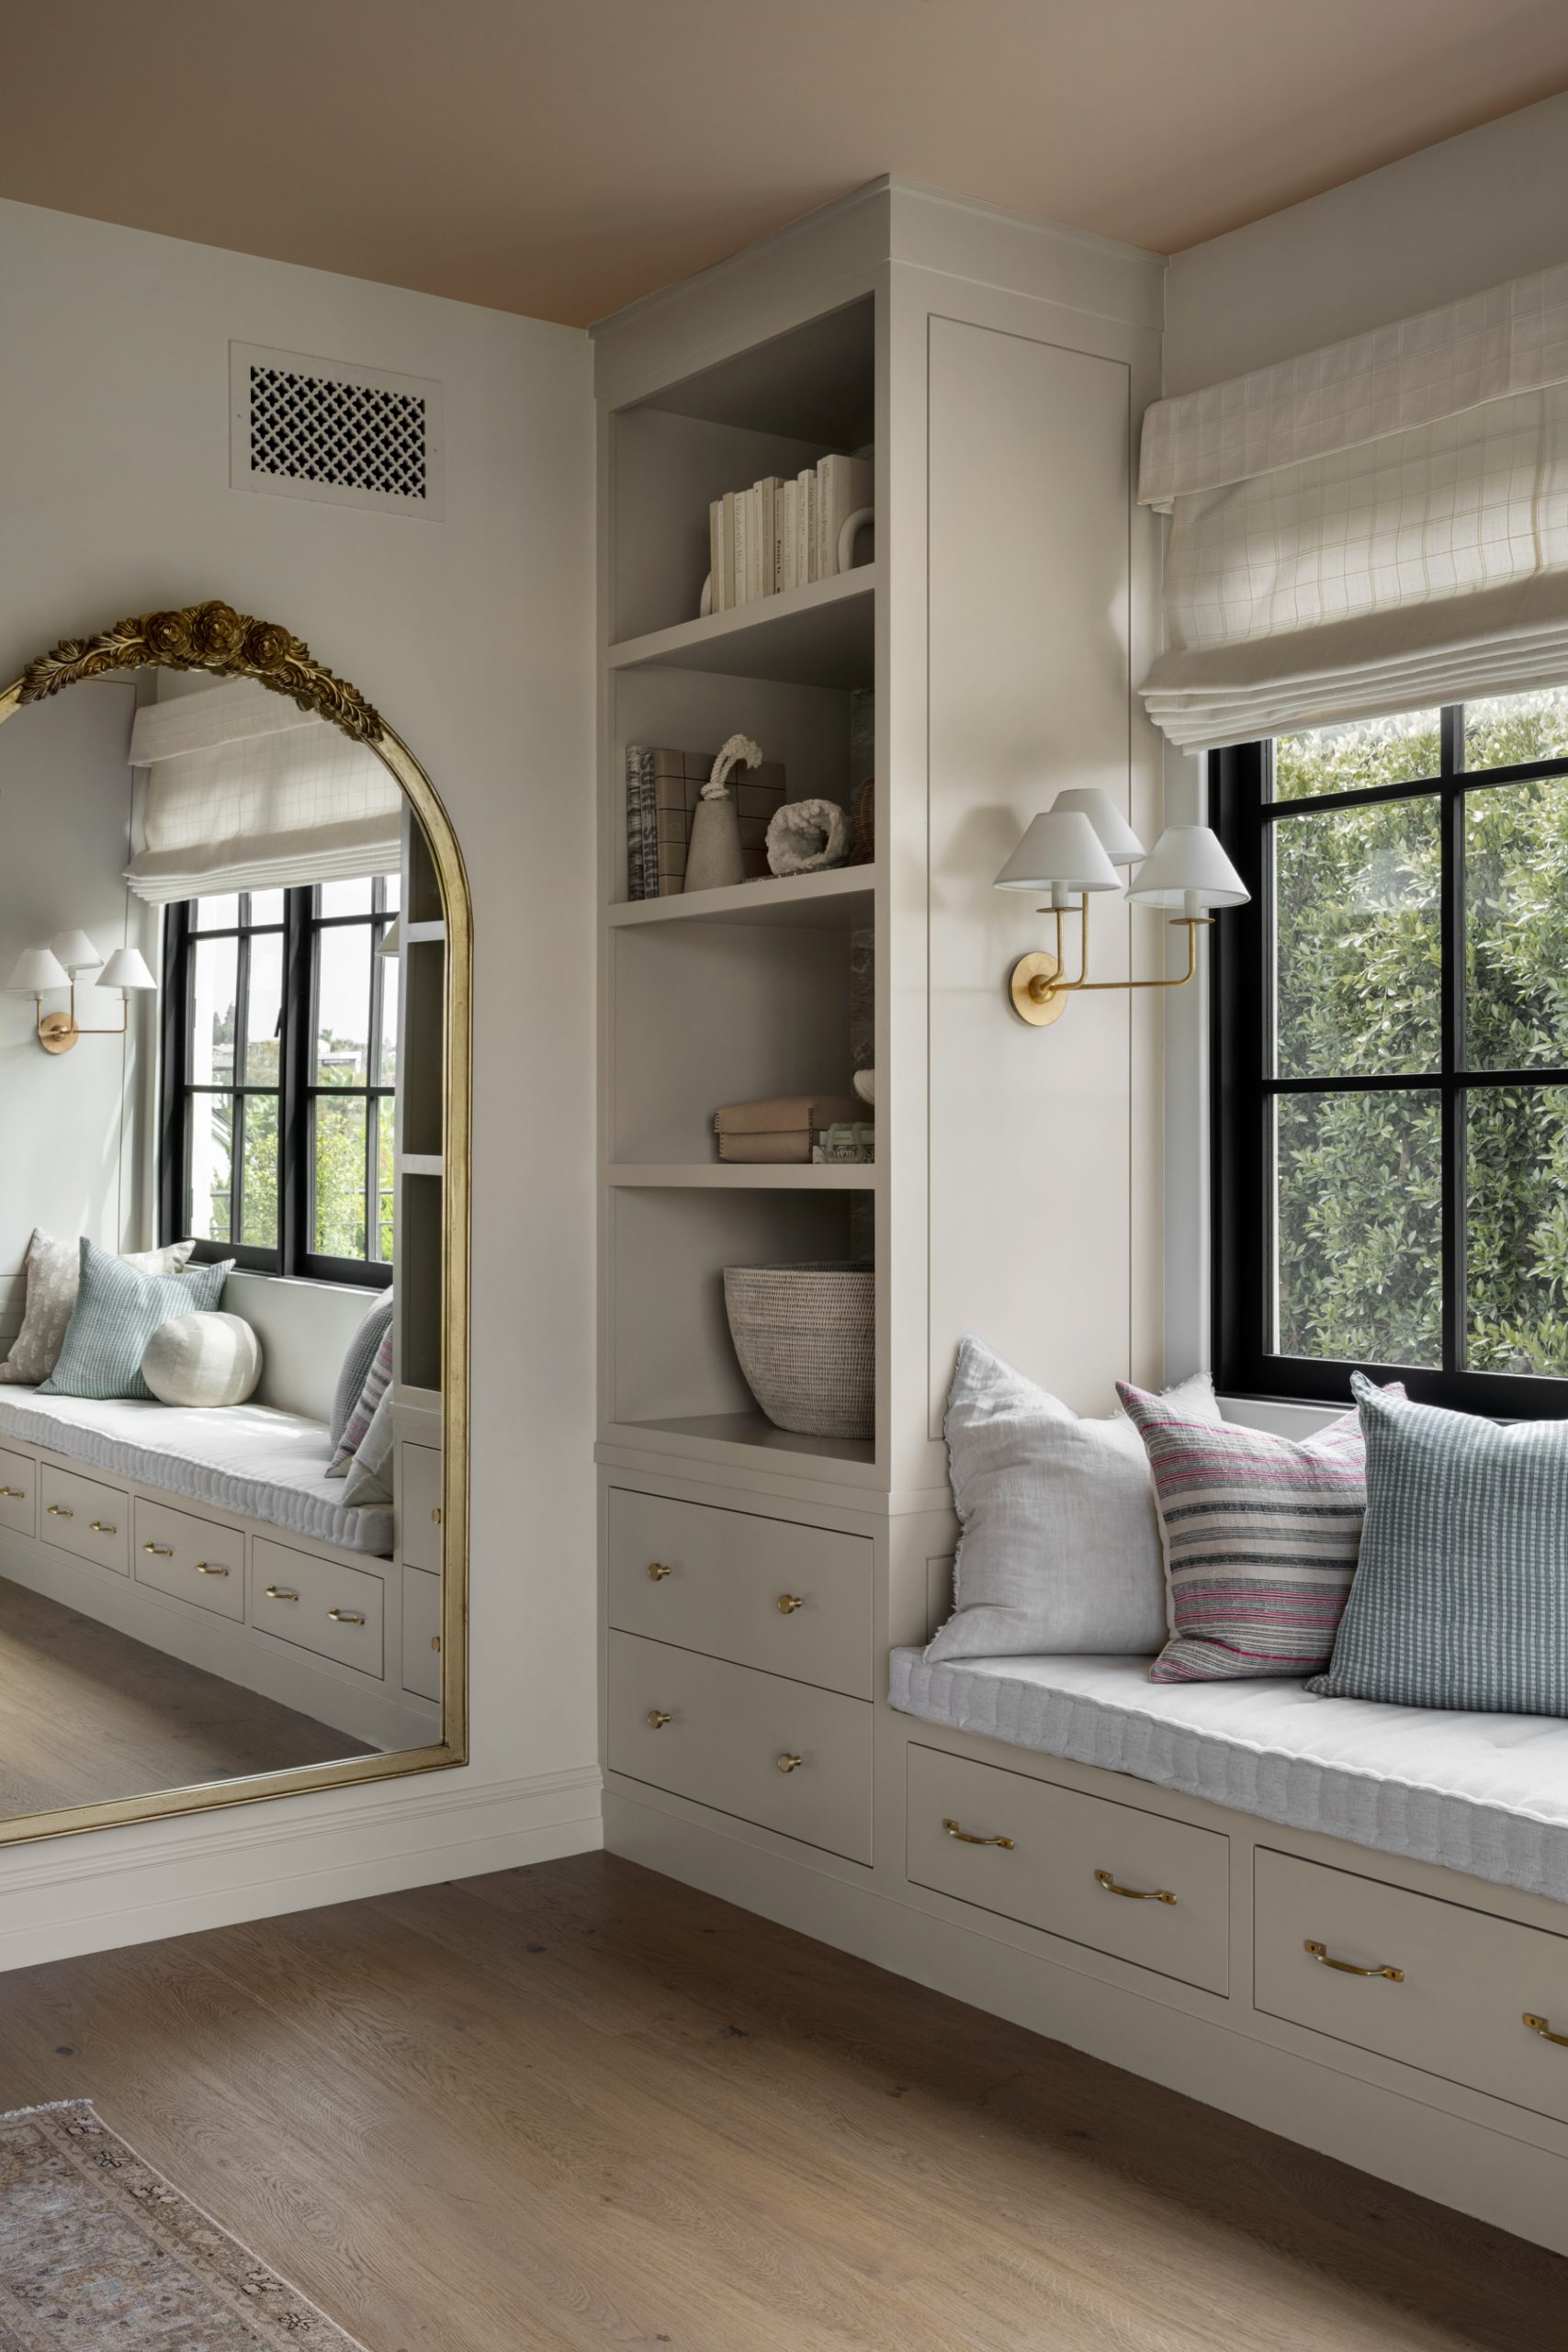 bedroom with built-in cabinets window seat and floor mirror